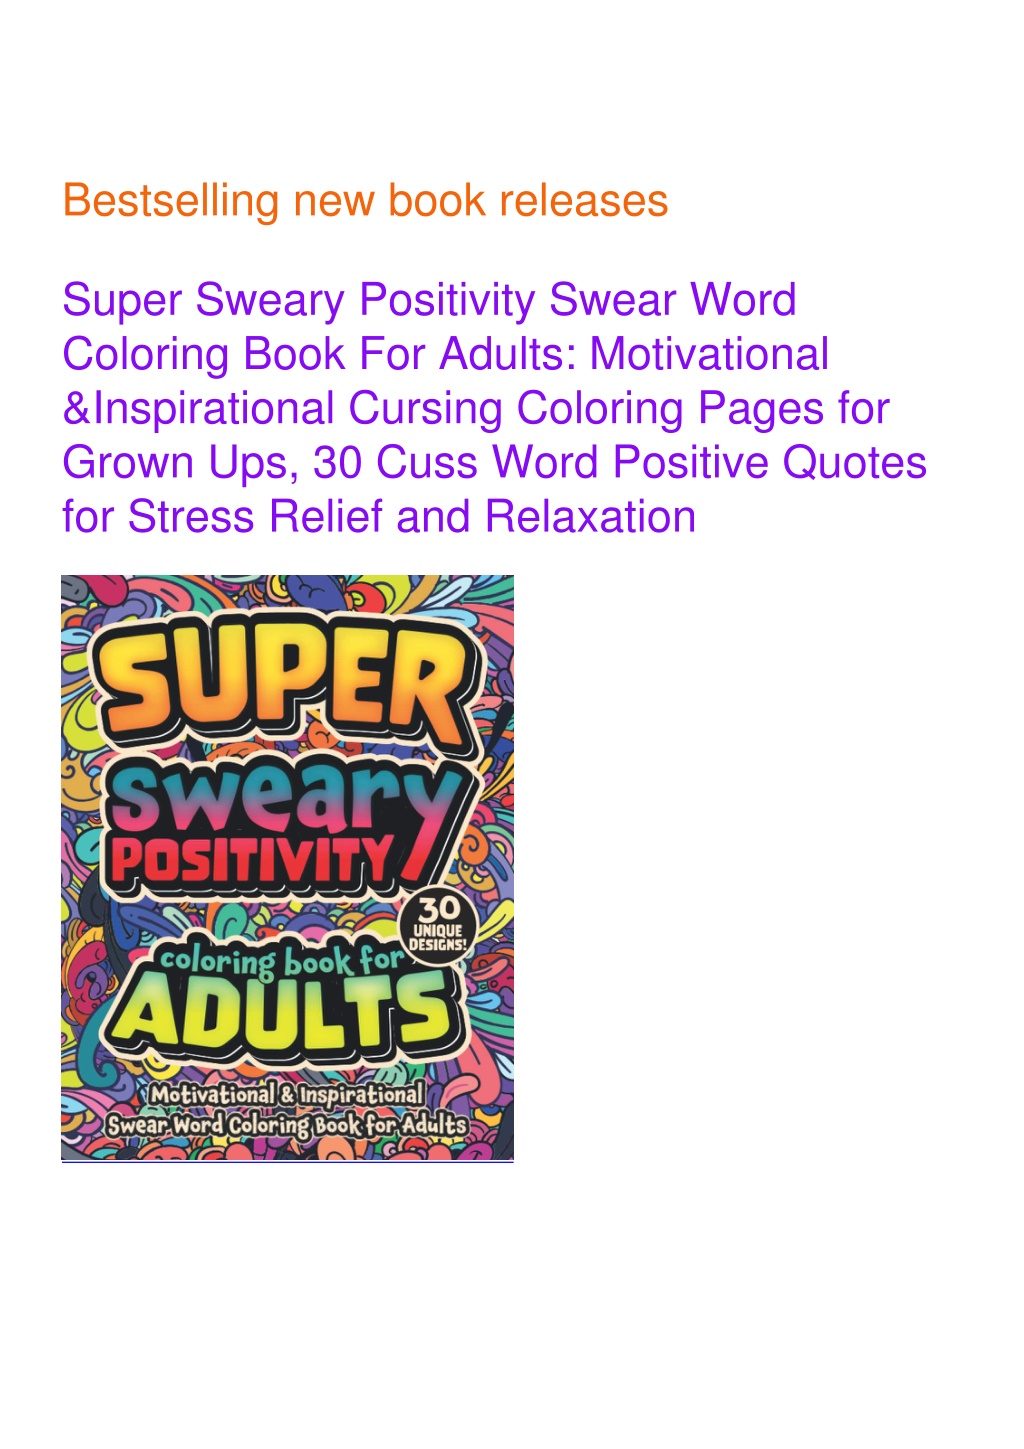 Super Sweary Positivity Swear Word Coloring Book For Adults: Motivational &  Inspirational Cursing Coloring Pages for Grown Ups, 30 Cuss Word Positive